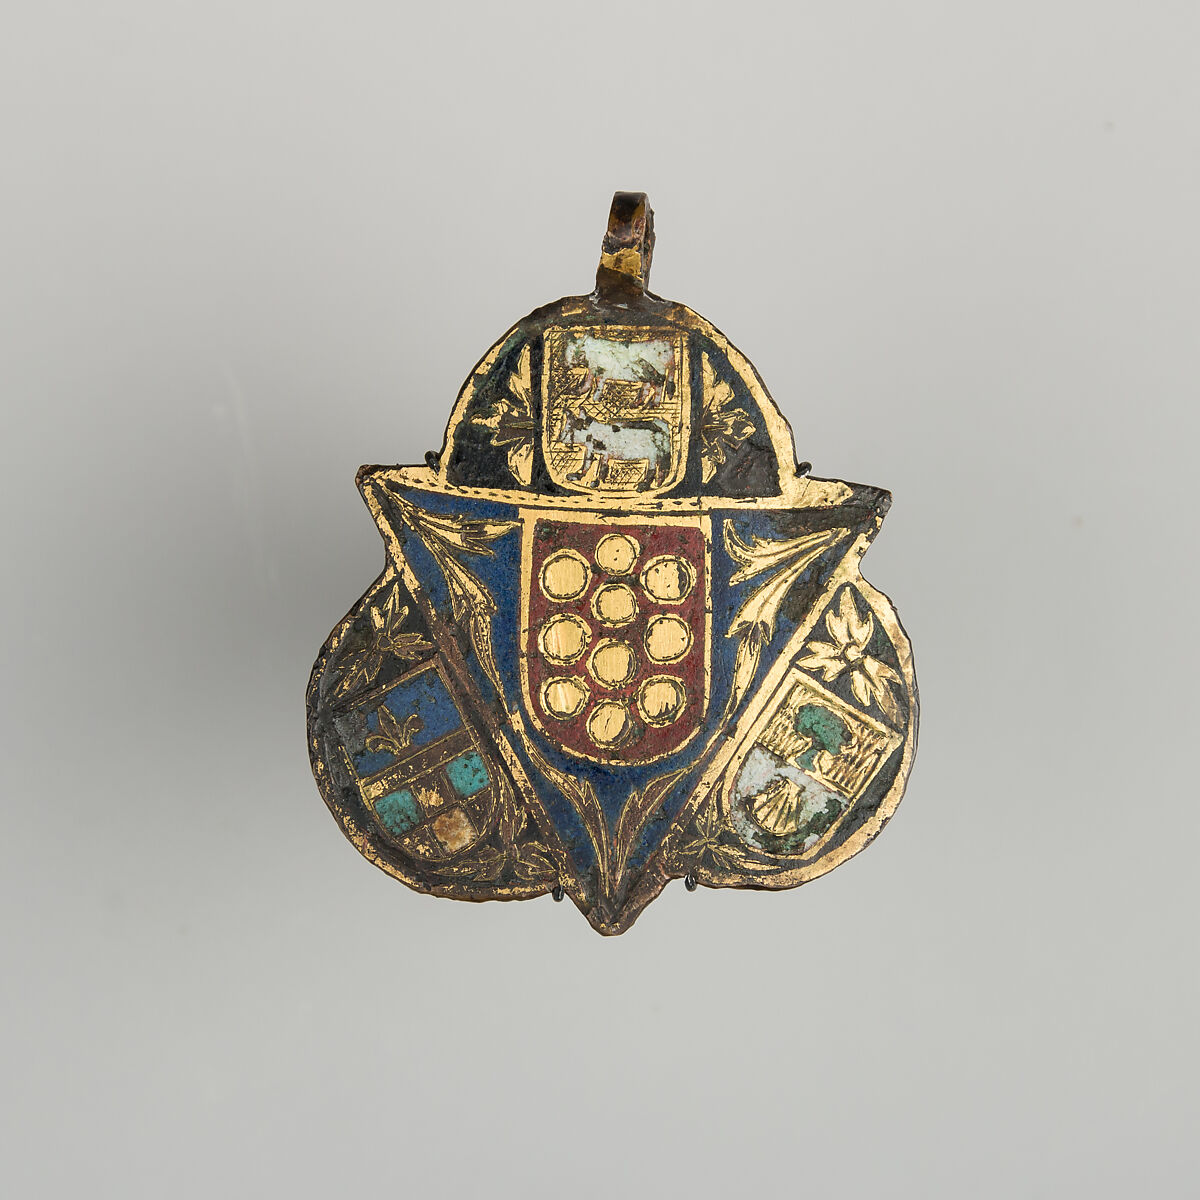 Pendant for Horse Trappings, Copper alloy, enamel, gold, Spanish 